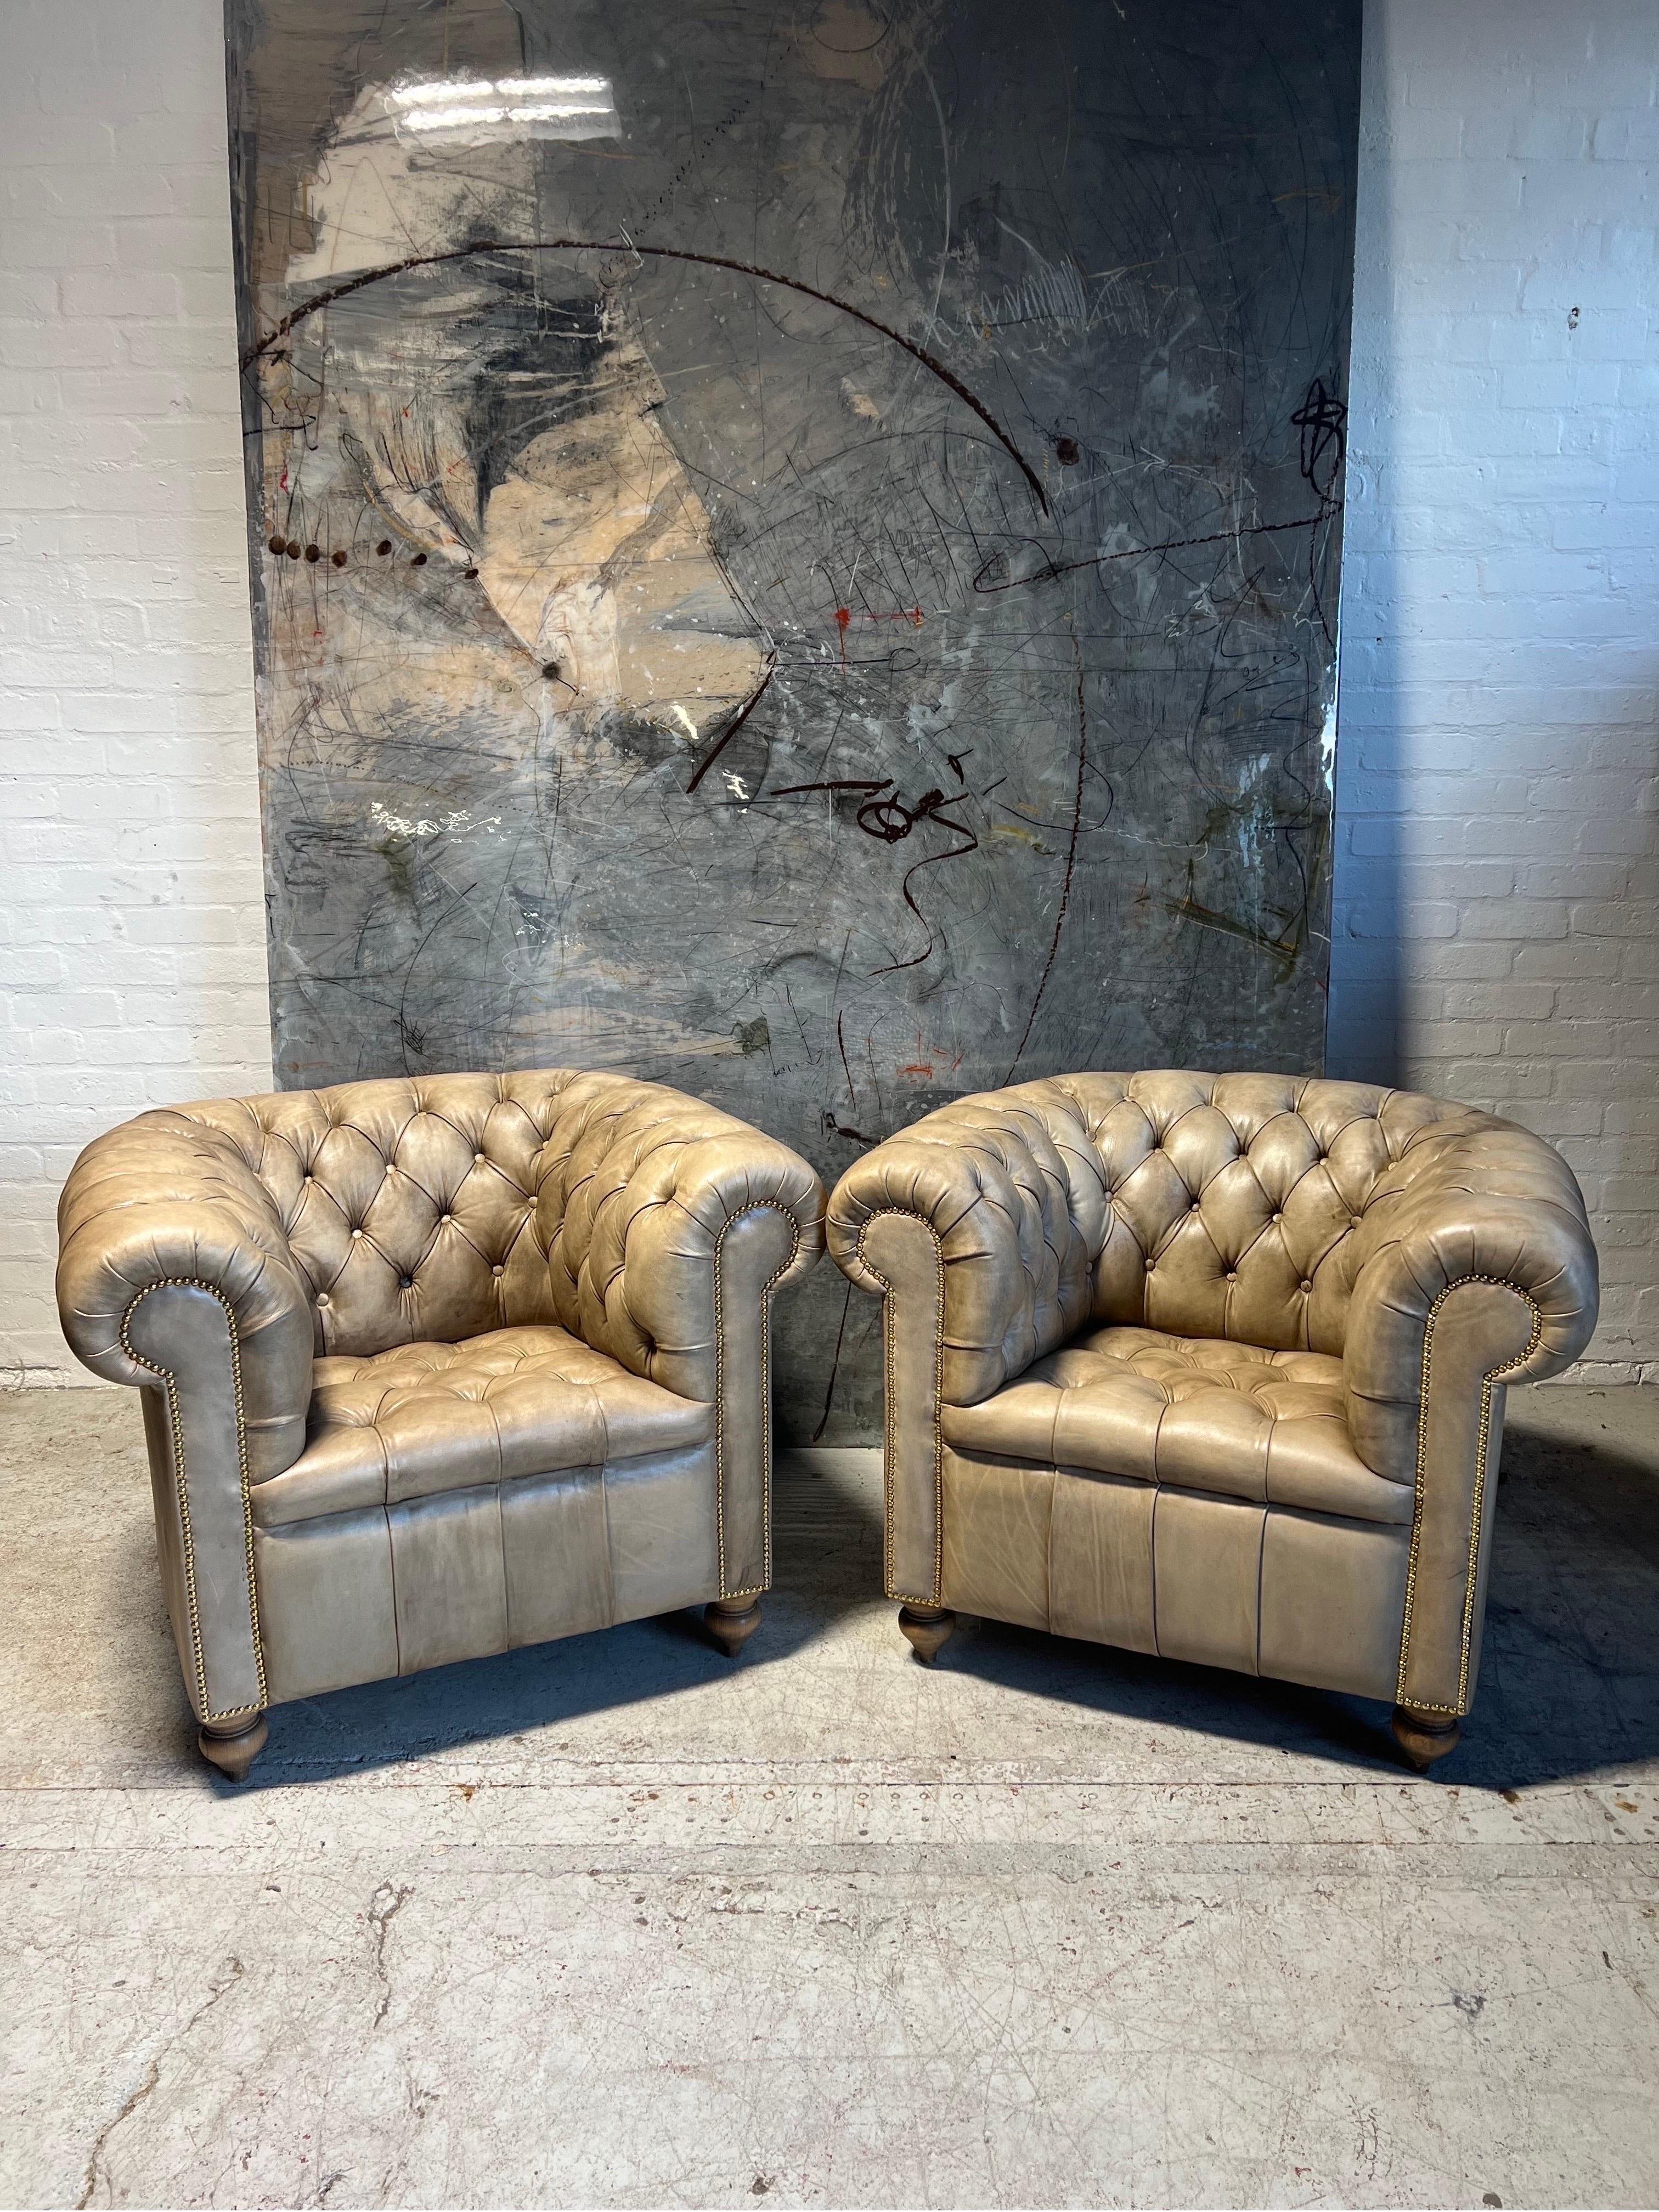 This really is a very special and most beautiful pair of midC club chairs.

We have fully restored the pieces and finished them in our hand dyed leathers using walnut husk as the dye.

The result is quite captivating with a beautiful natural patina.